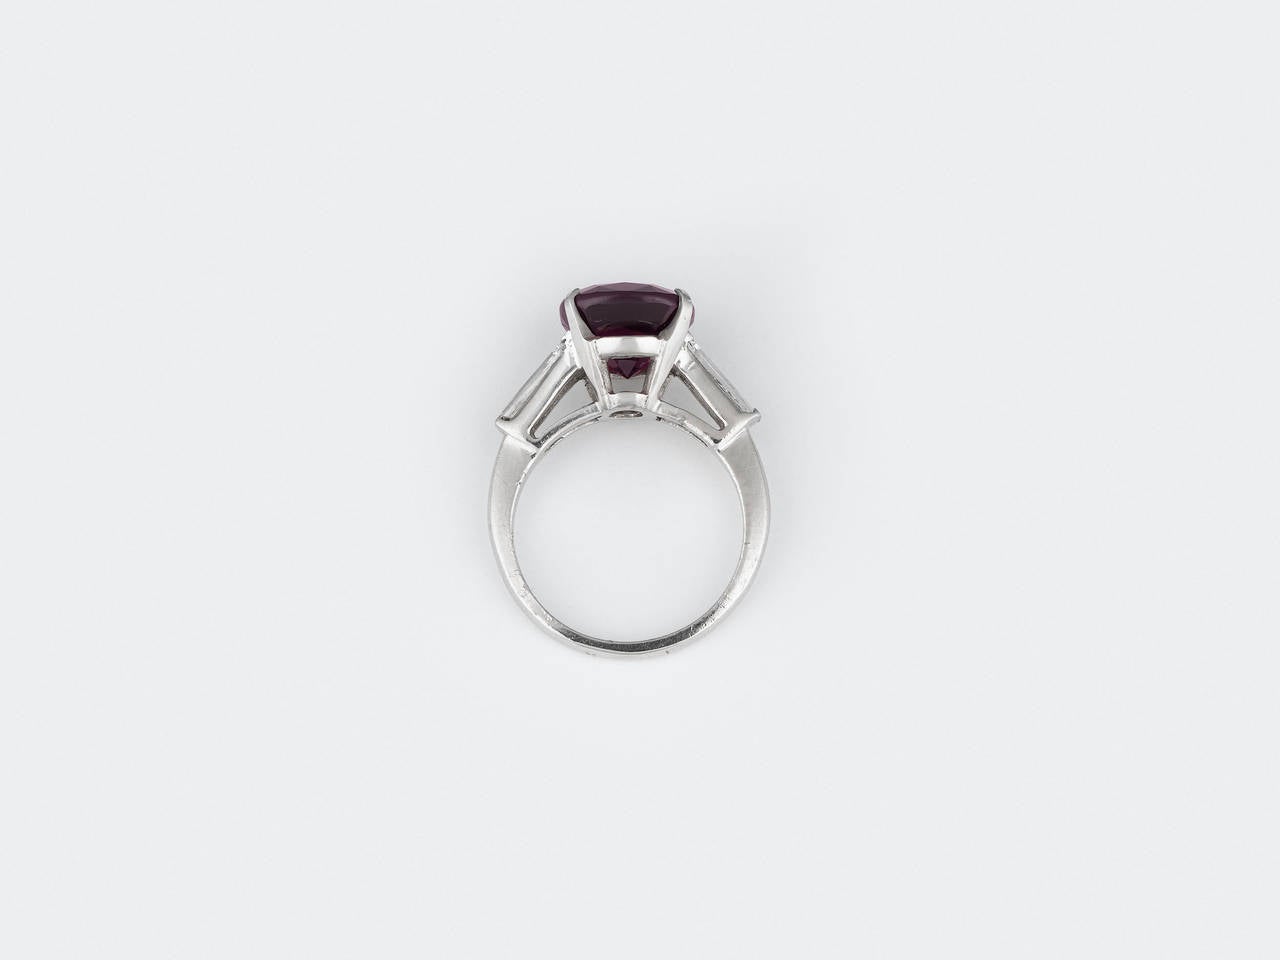 A magnificent, natural spinel commands attention in this stunning ring. Exhibiting a captivating aubergine hue, this rare gem weighs 5.90 carats and is complemented by approximately .35 carats of baguette diamonds. Set in platinum, these lively and